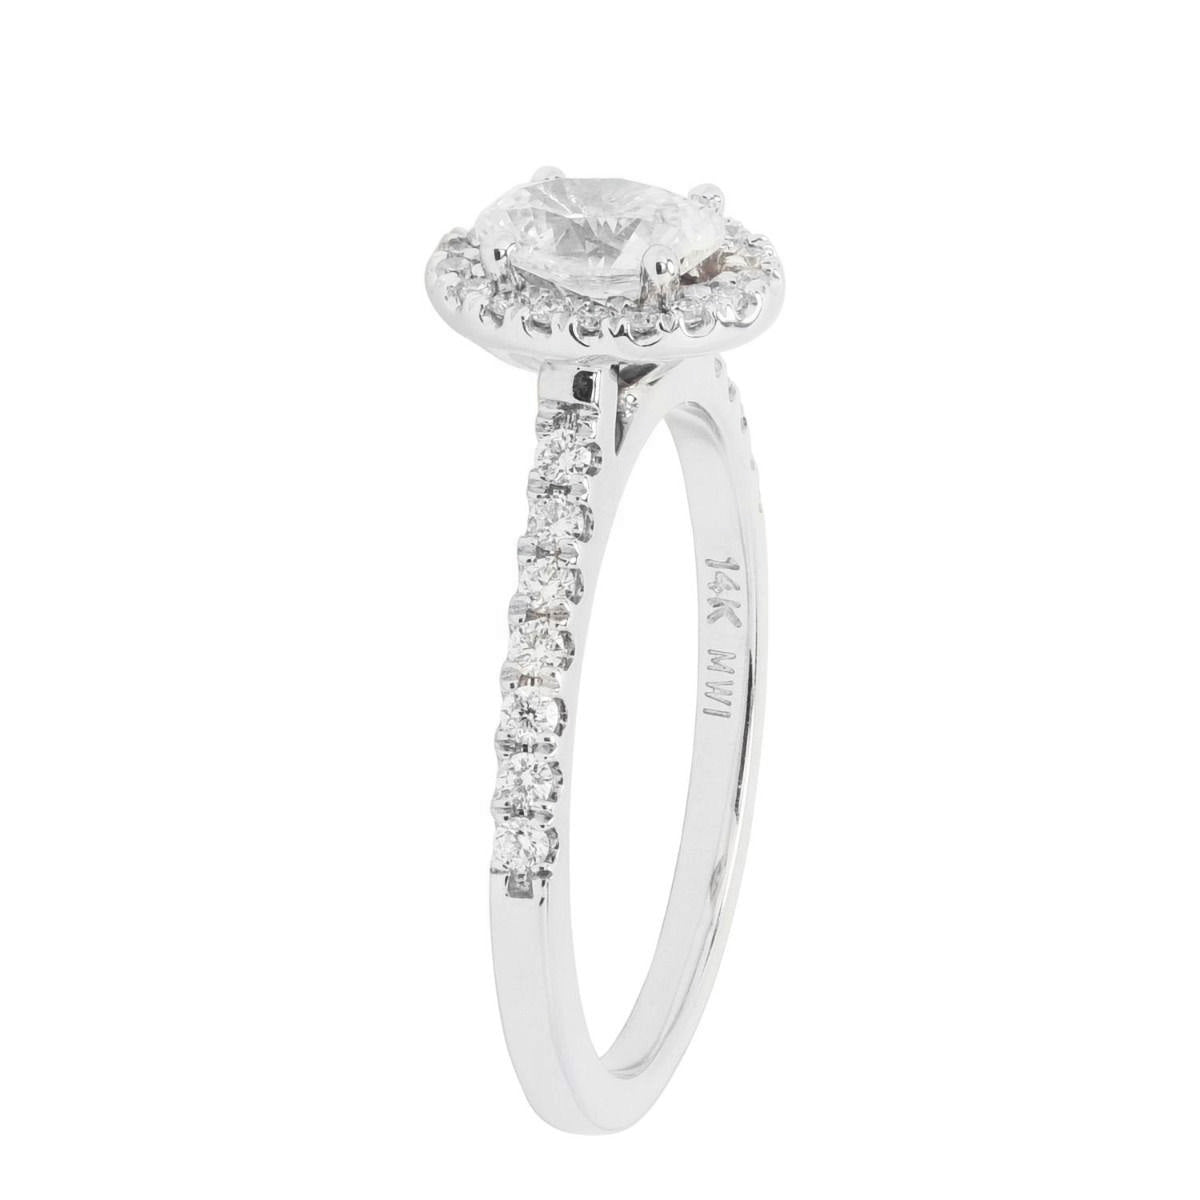 Oval Diamond Halo Engagement Ring in 14kt White Gold (3/4ct tw)